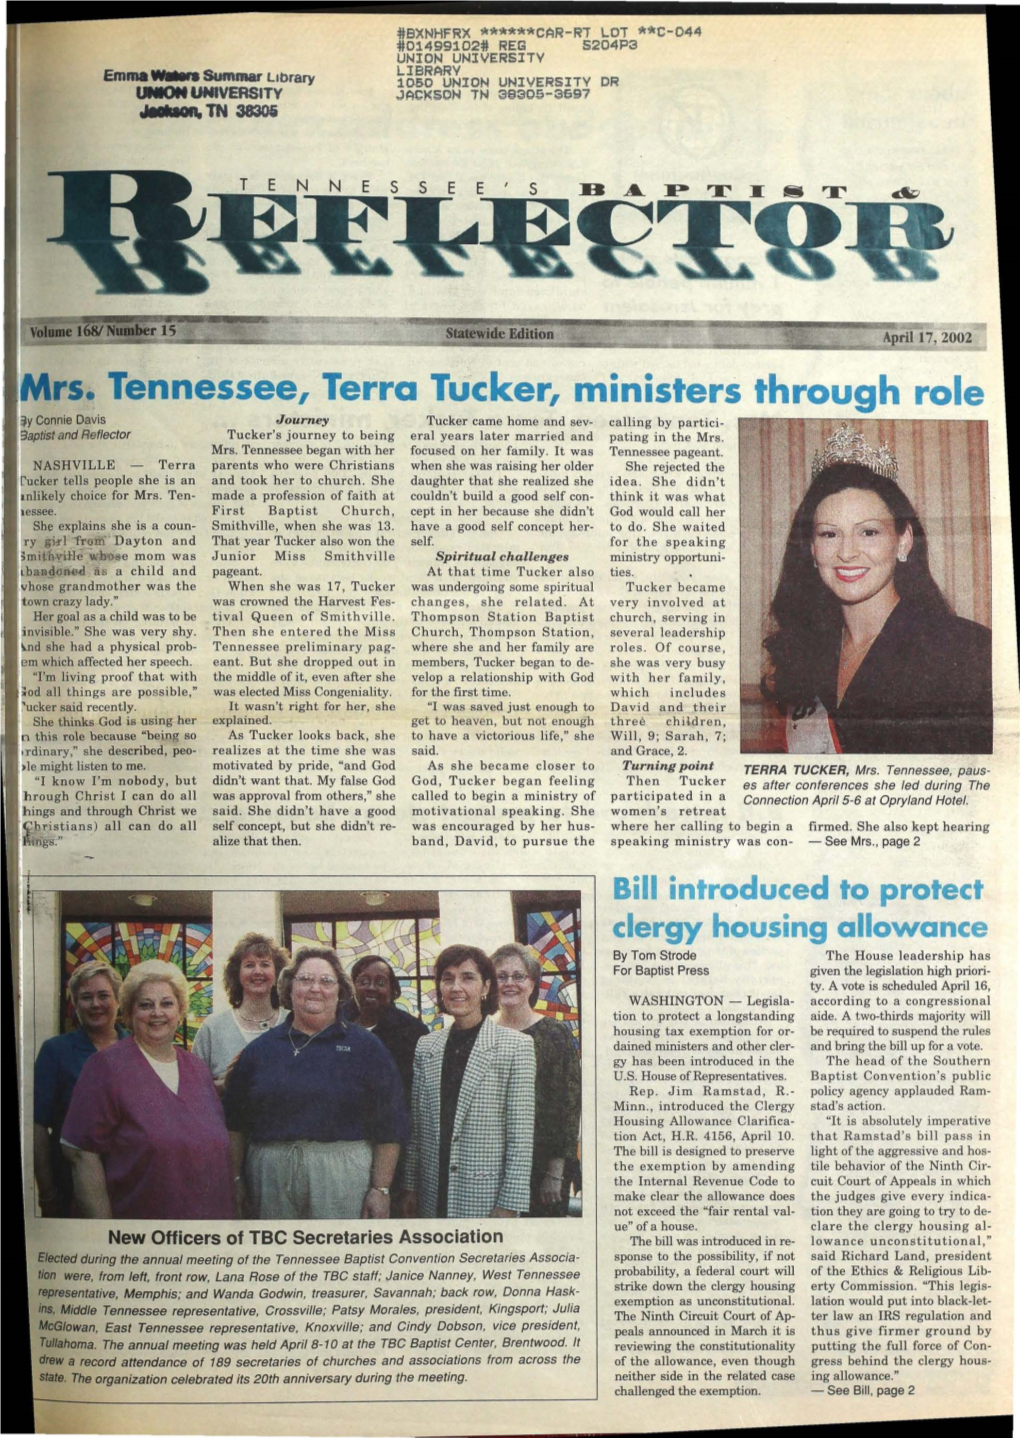 Rs. Tennessee, Terra Tucker, Ministers Through Role